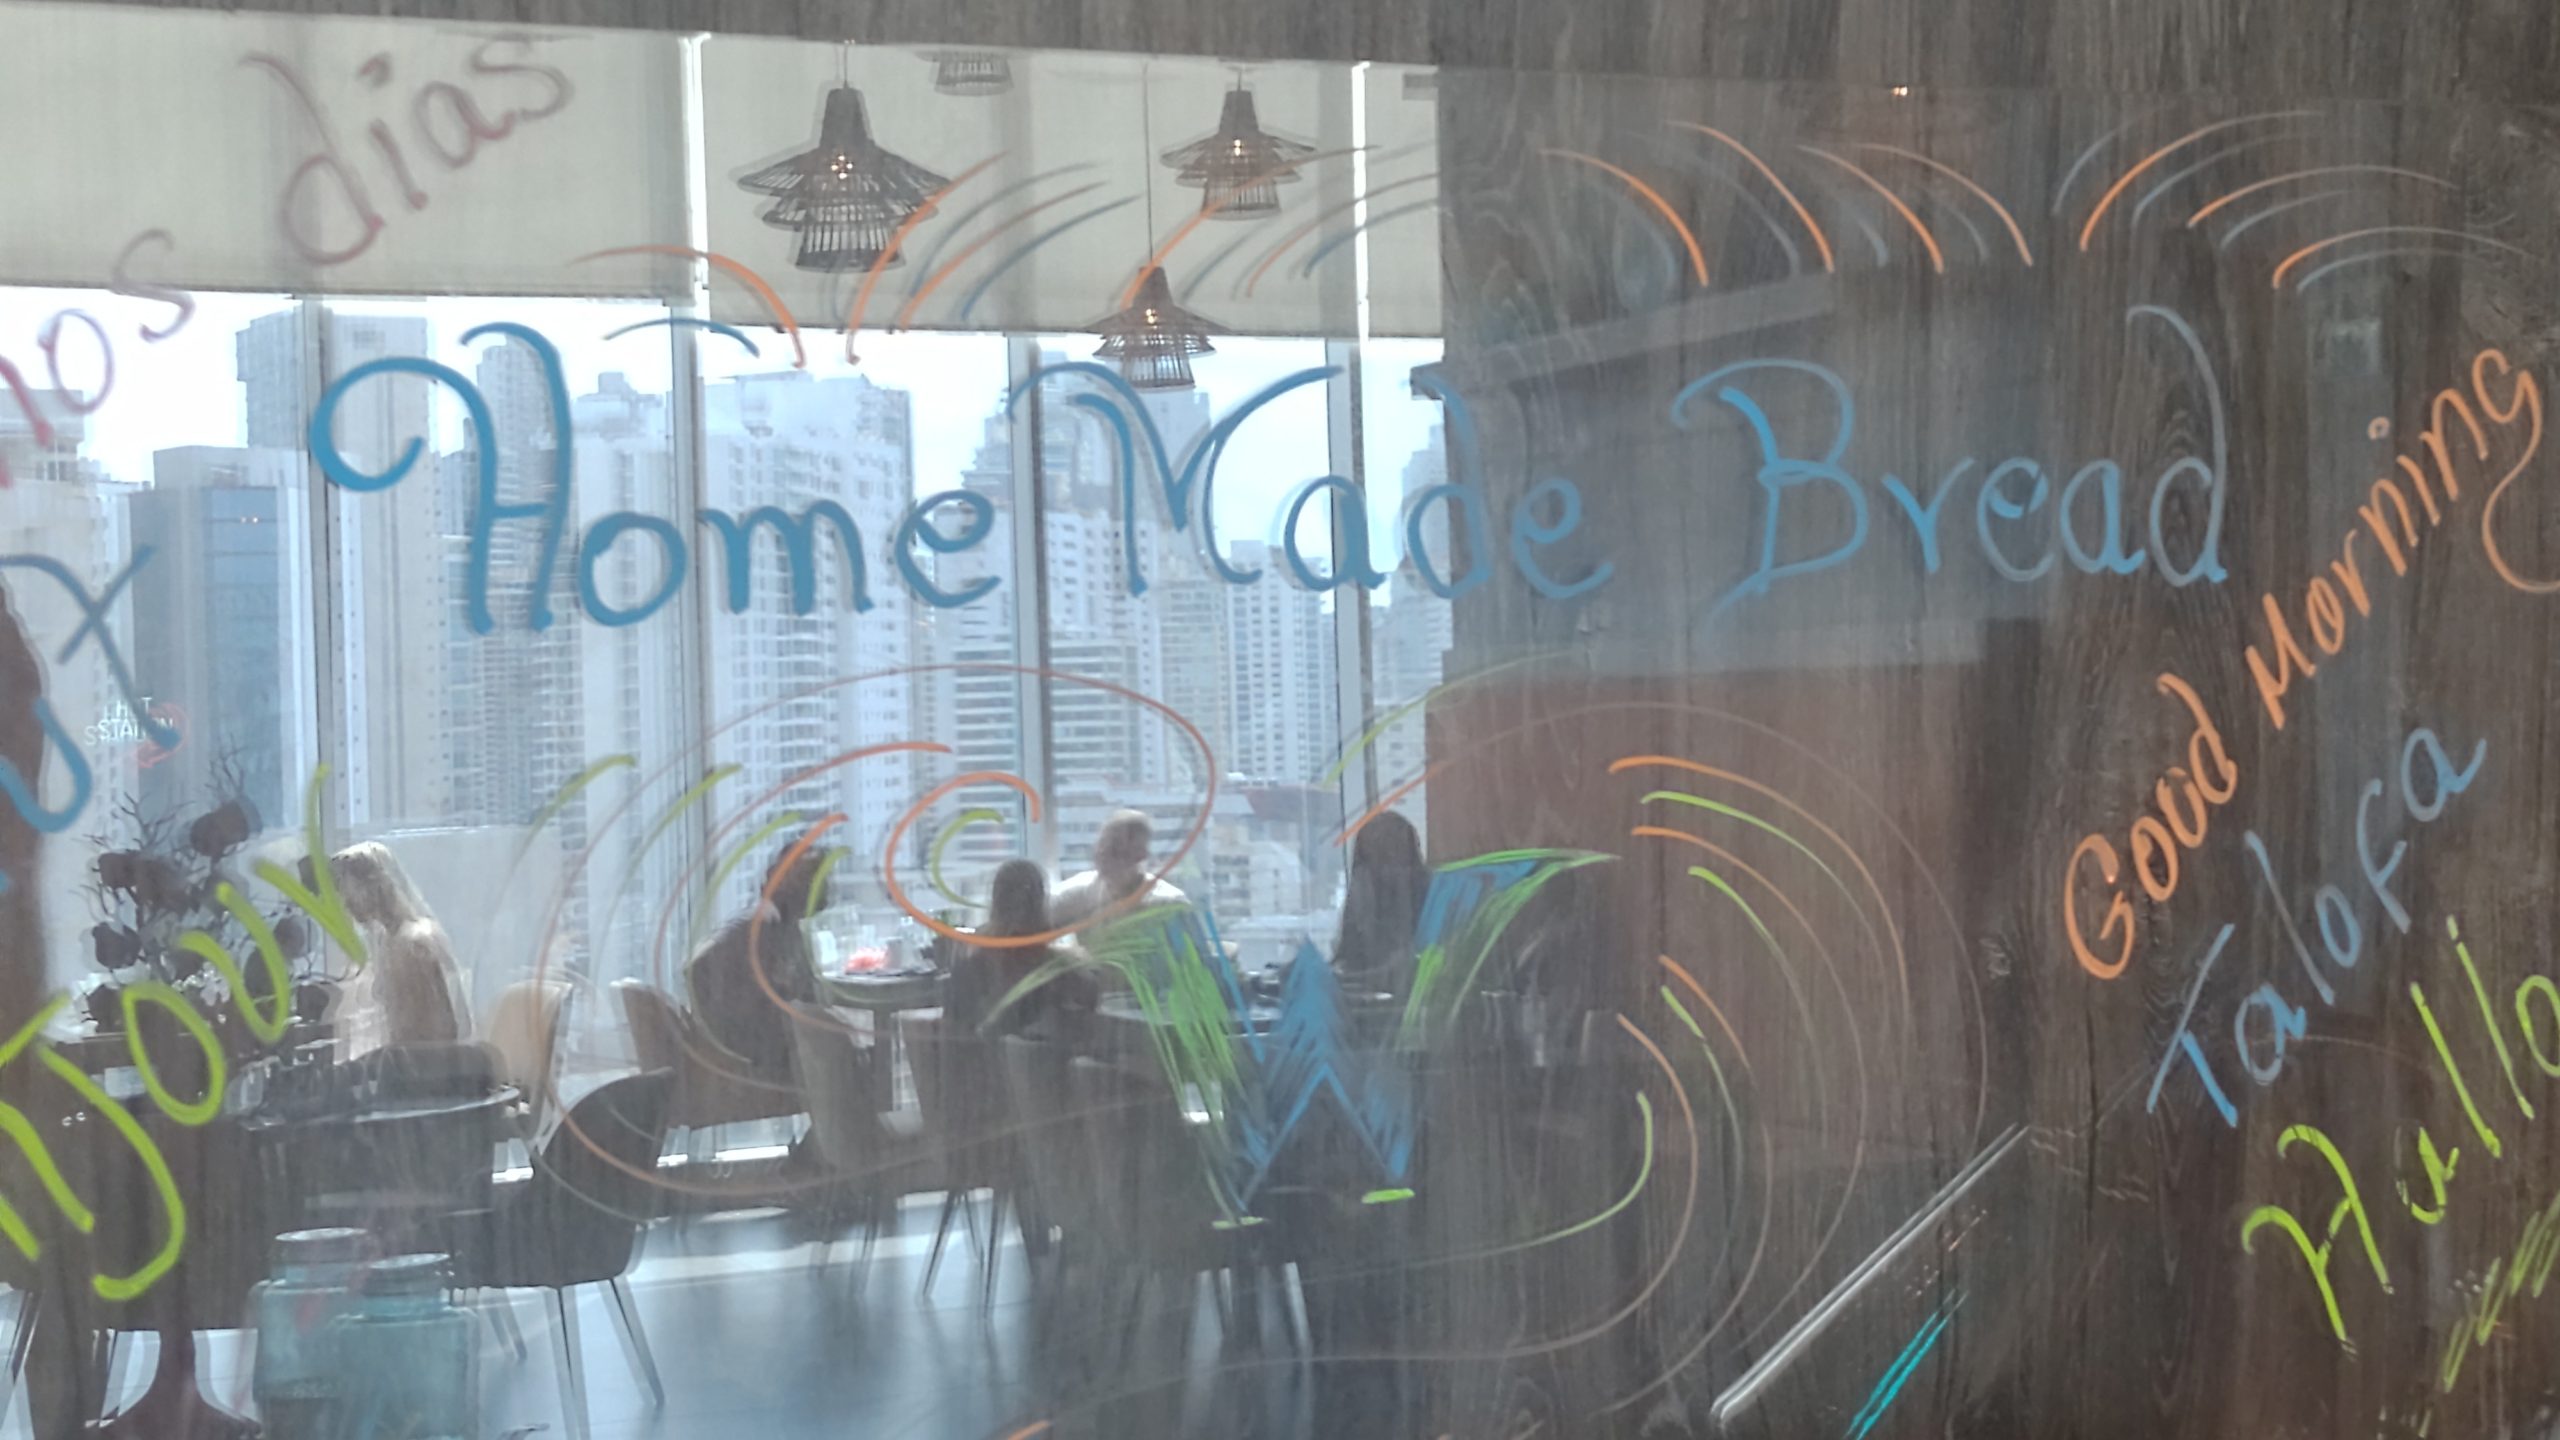 picture of the homade breads sign.